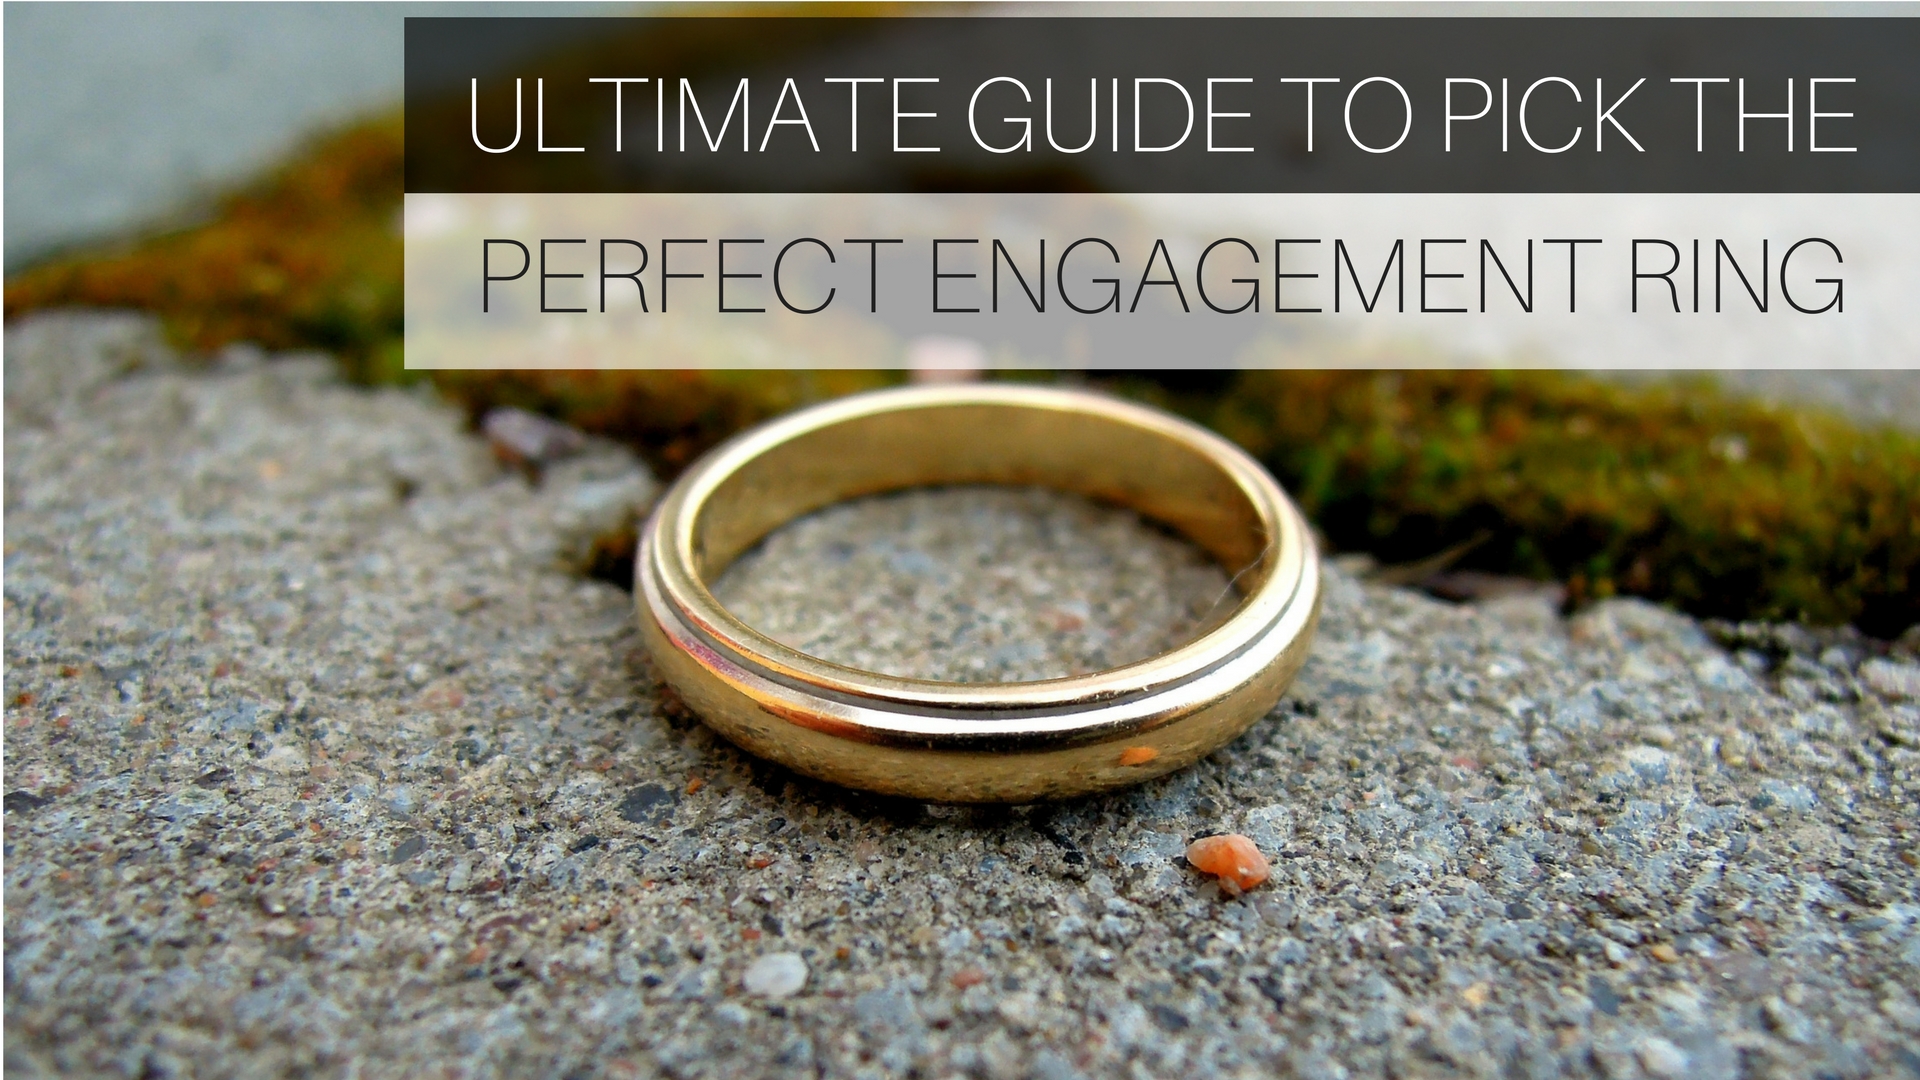 Ultimate Guide To Pick The Perfect Engagement Ring - Dazzlingrock.com